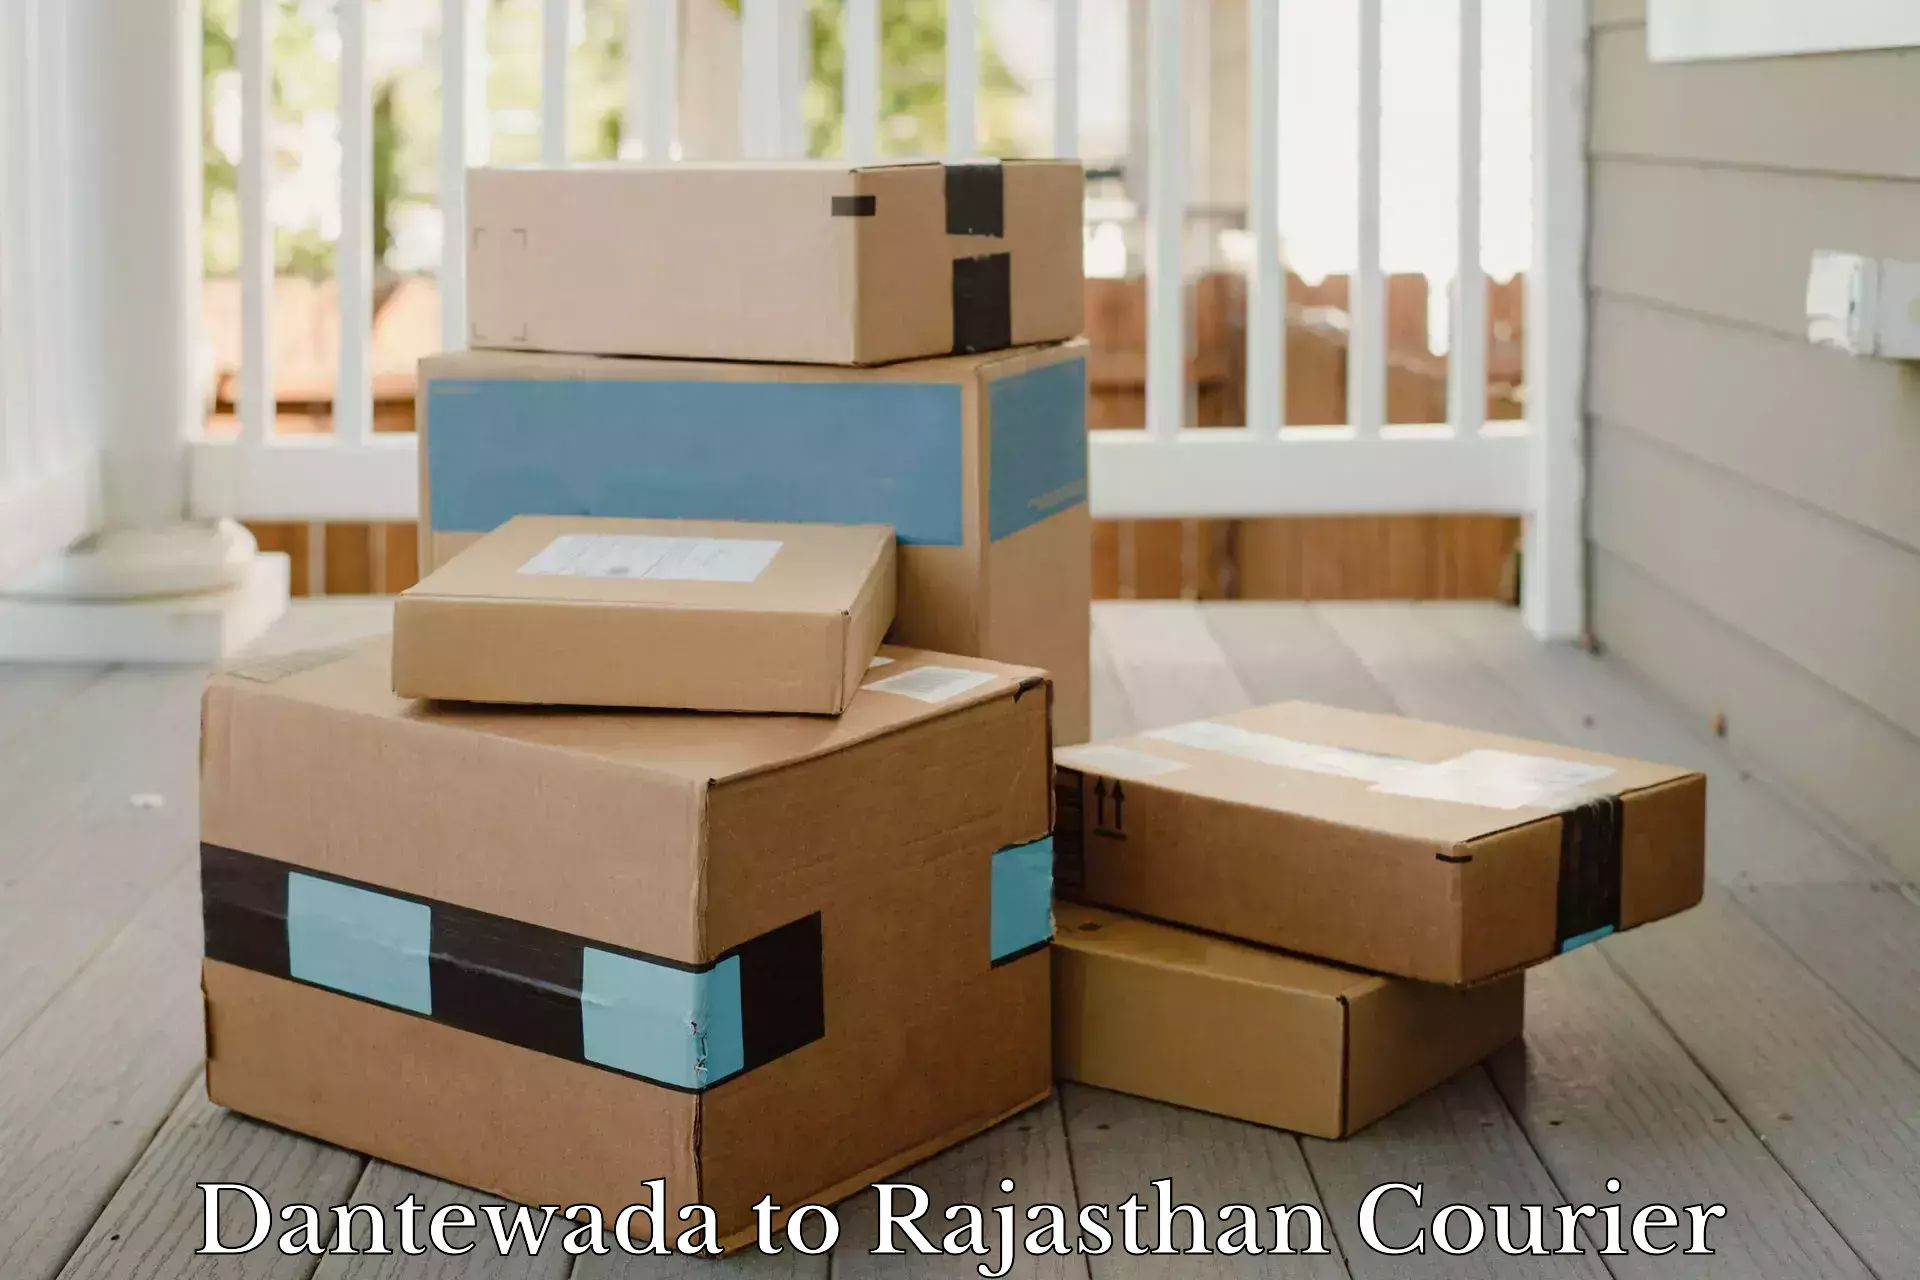 Full-service courier options Dantewada to Rajasthan